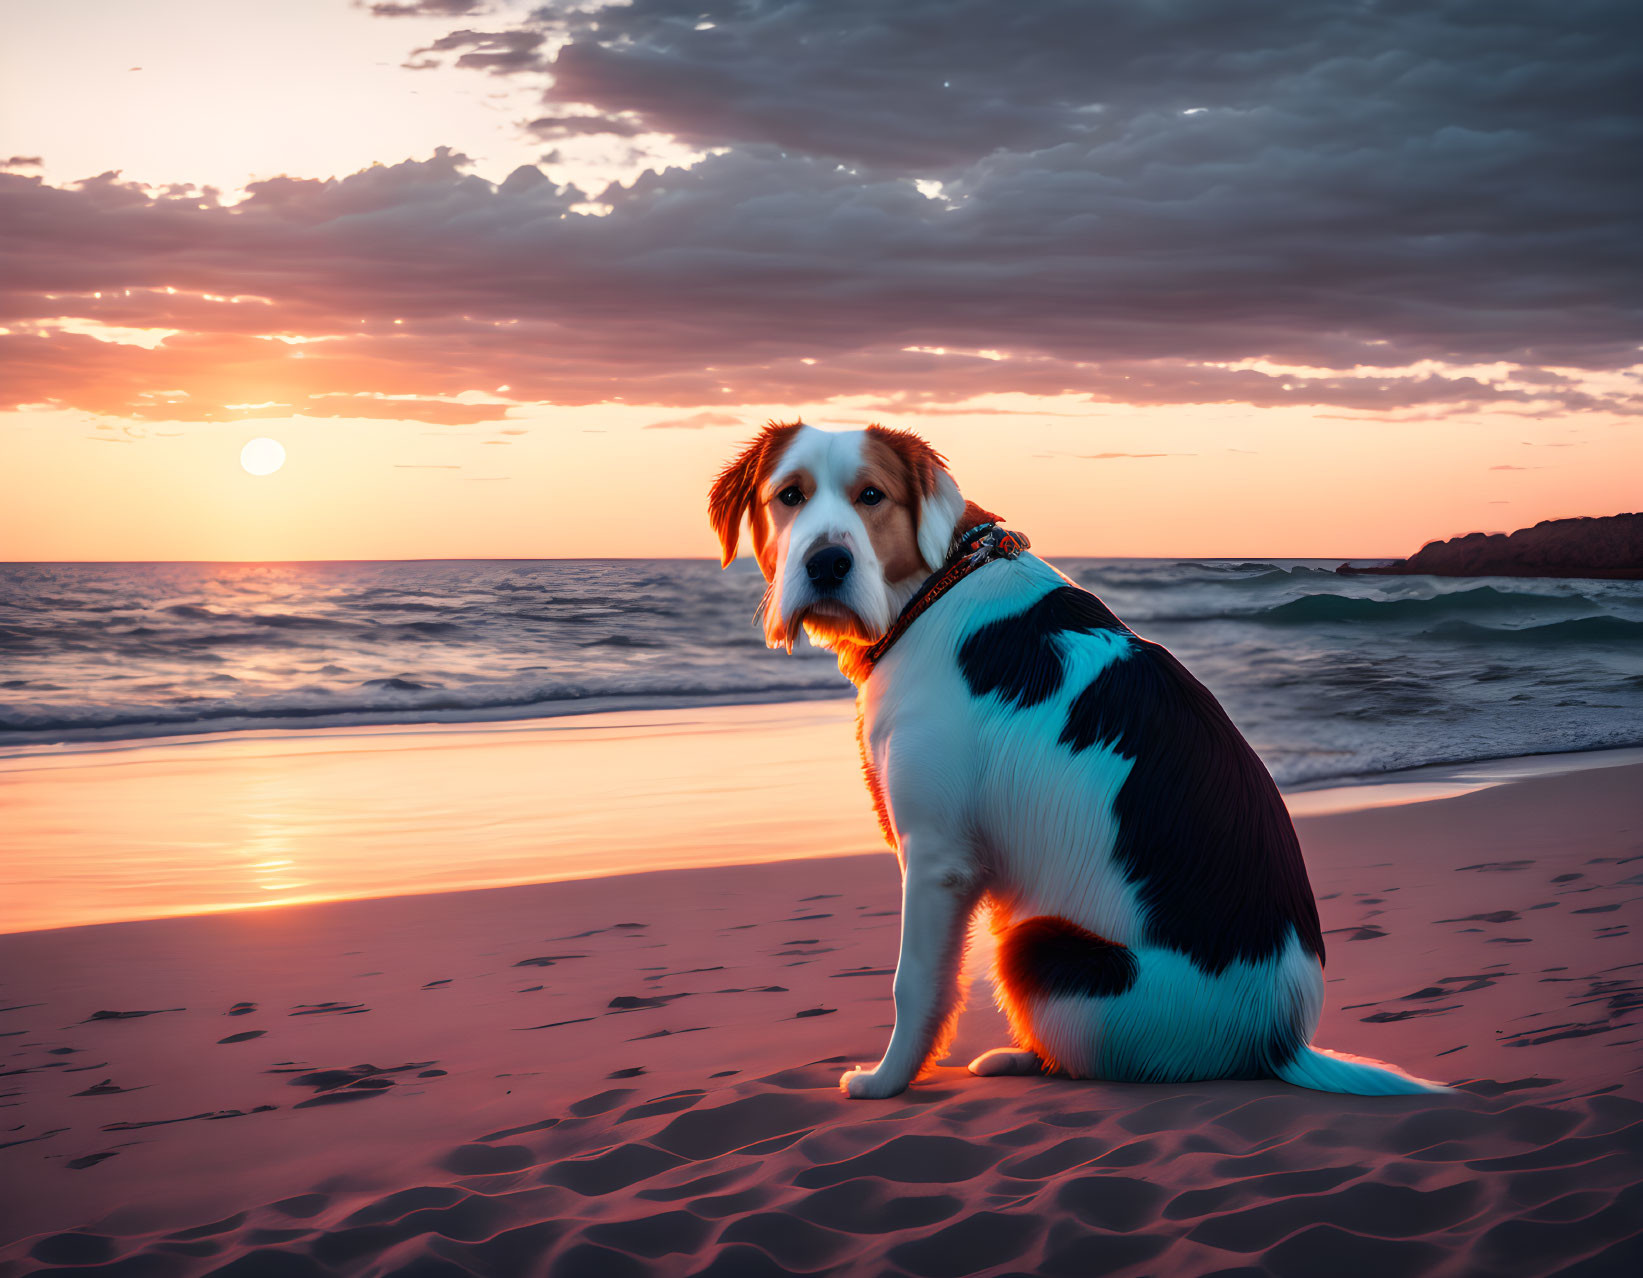 Dog on Beach at Sunset with Waves and Warm Sky